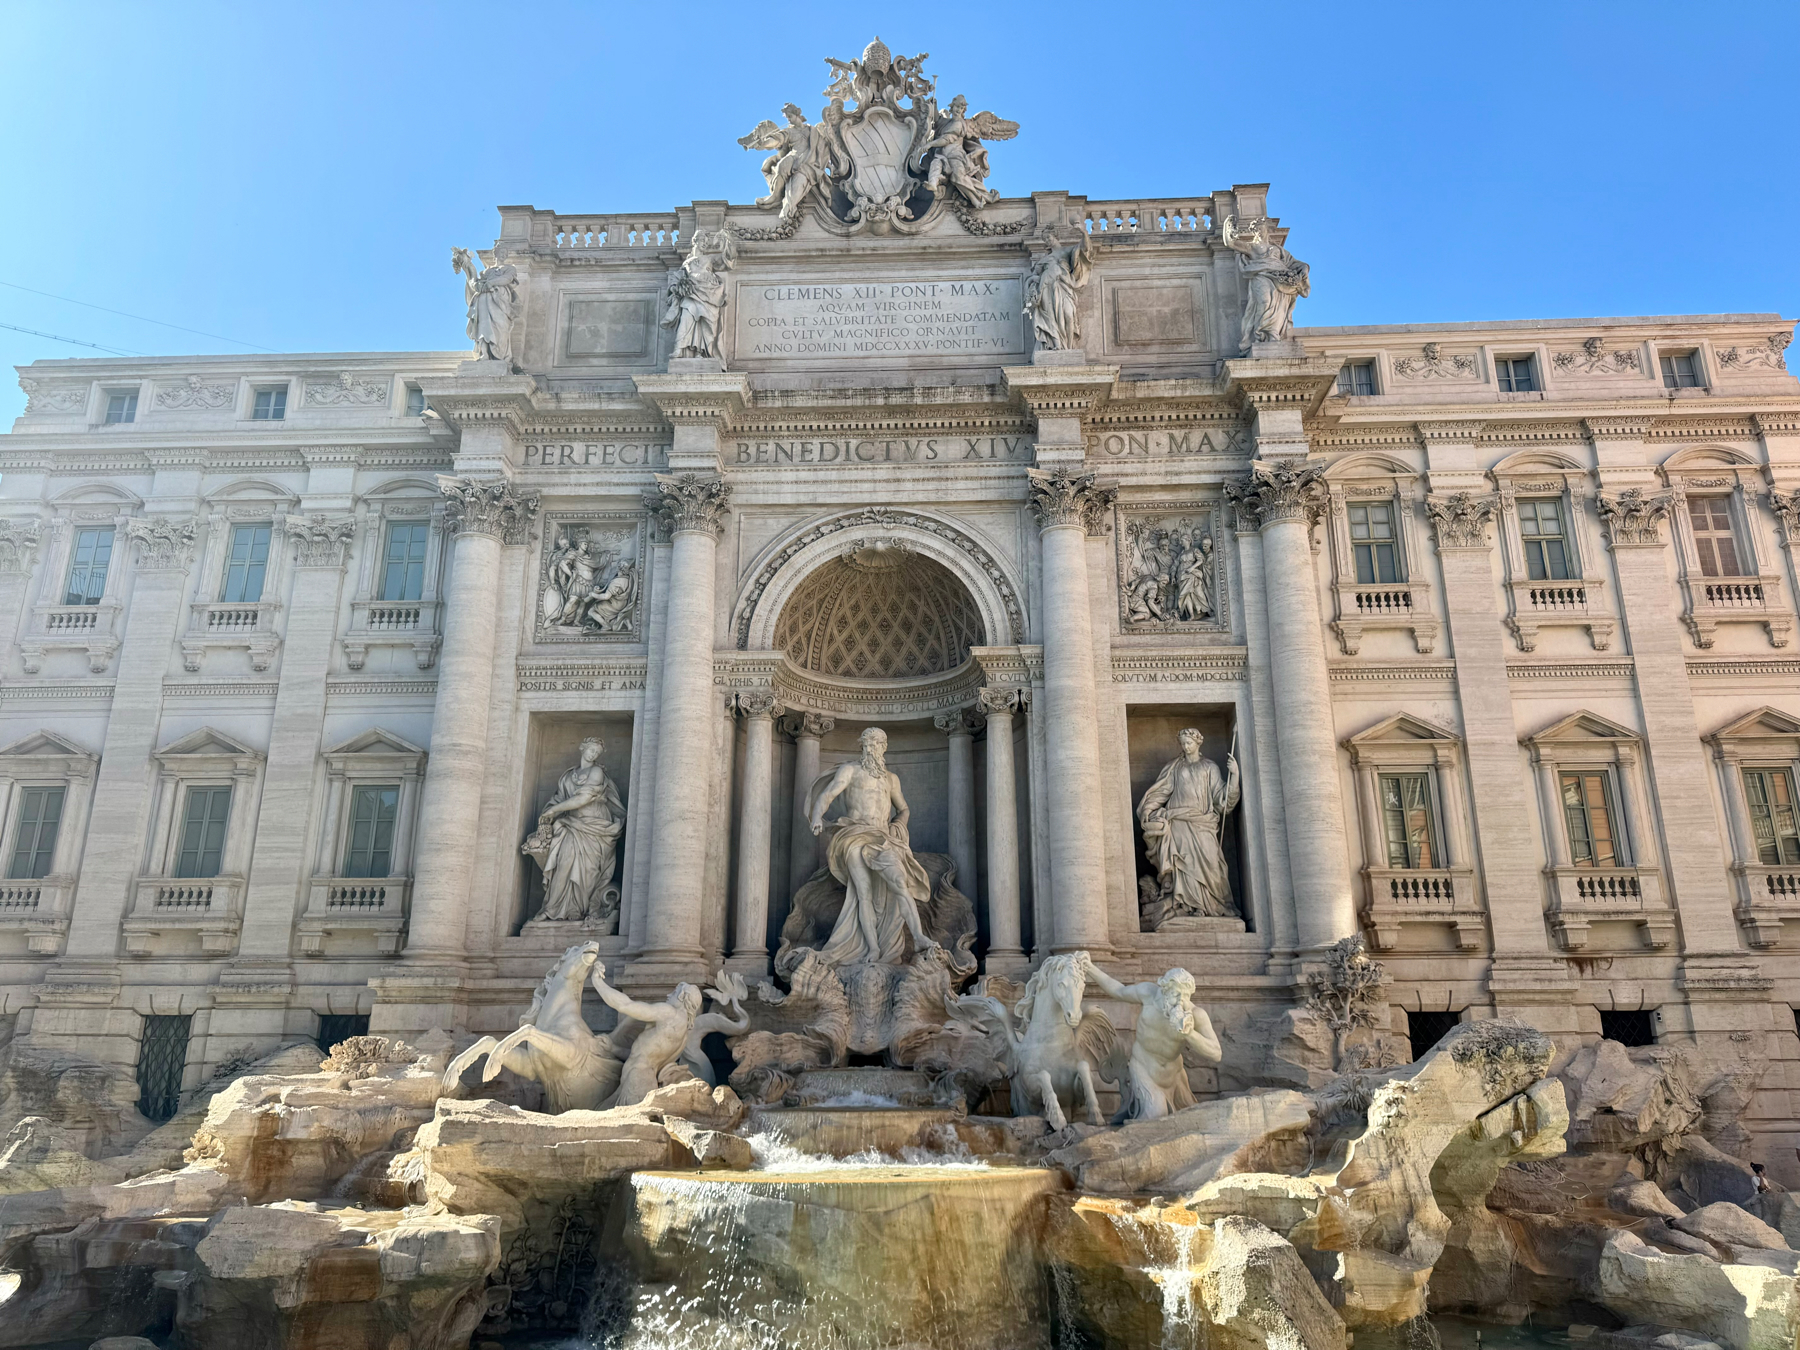 The image shows the Trevi Fountain, a famous Baroque fountain in Rome, Italy. It features intricate sculptures of mythological figures, including Oceanus standing in the central niche, surrounded by tritons and horses.